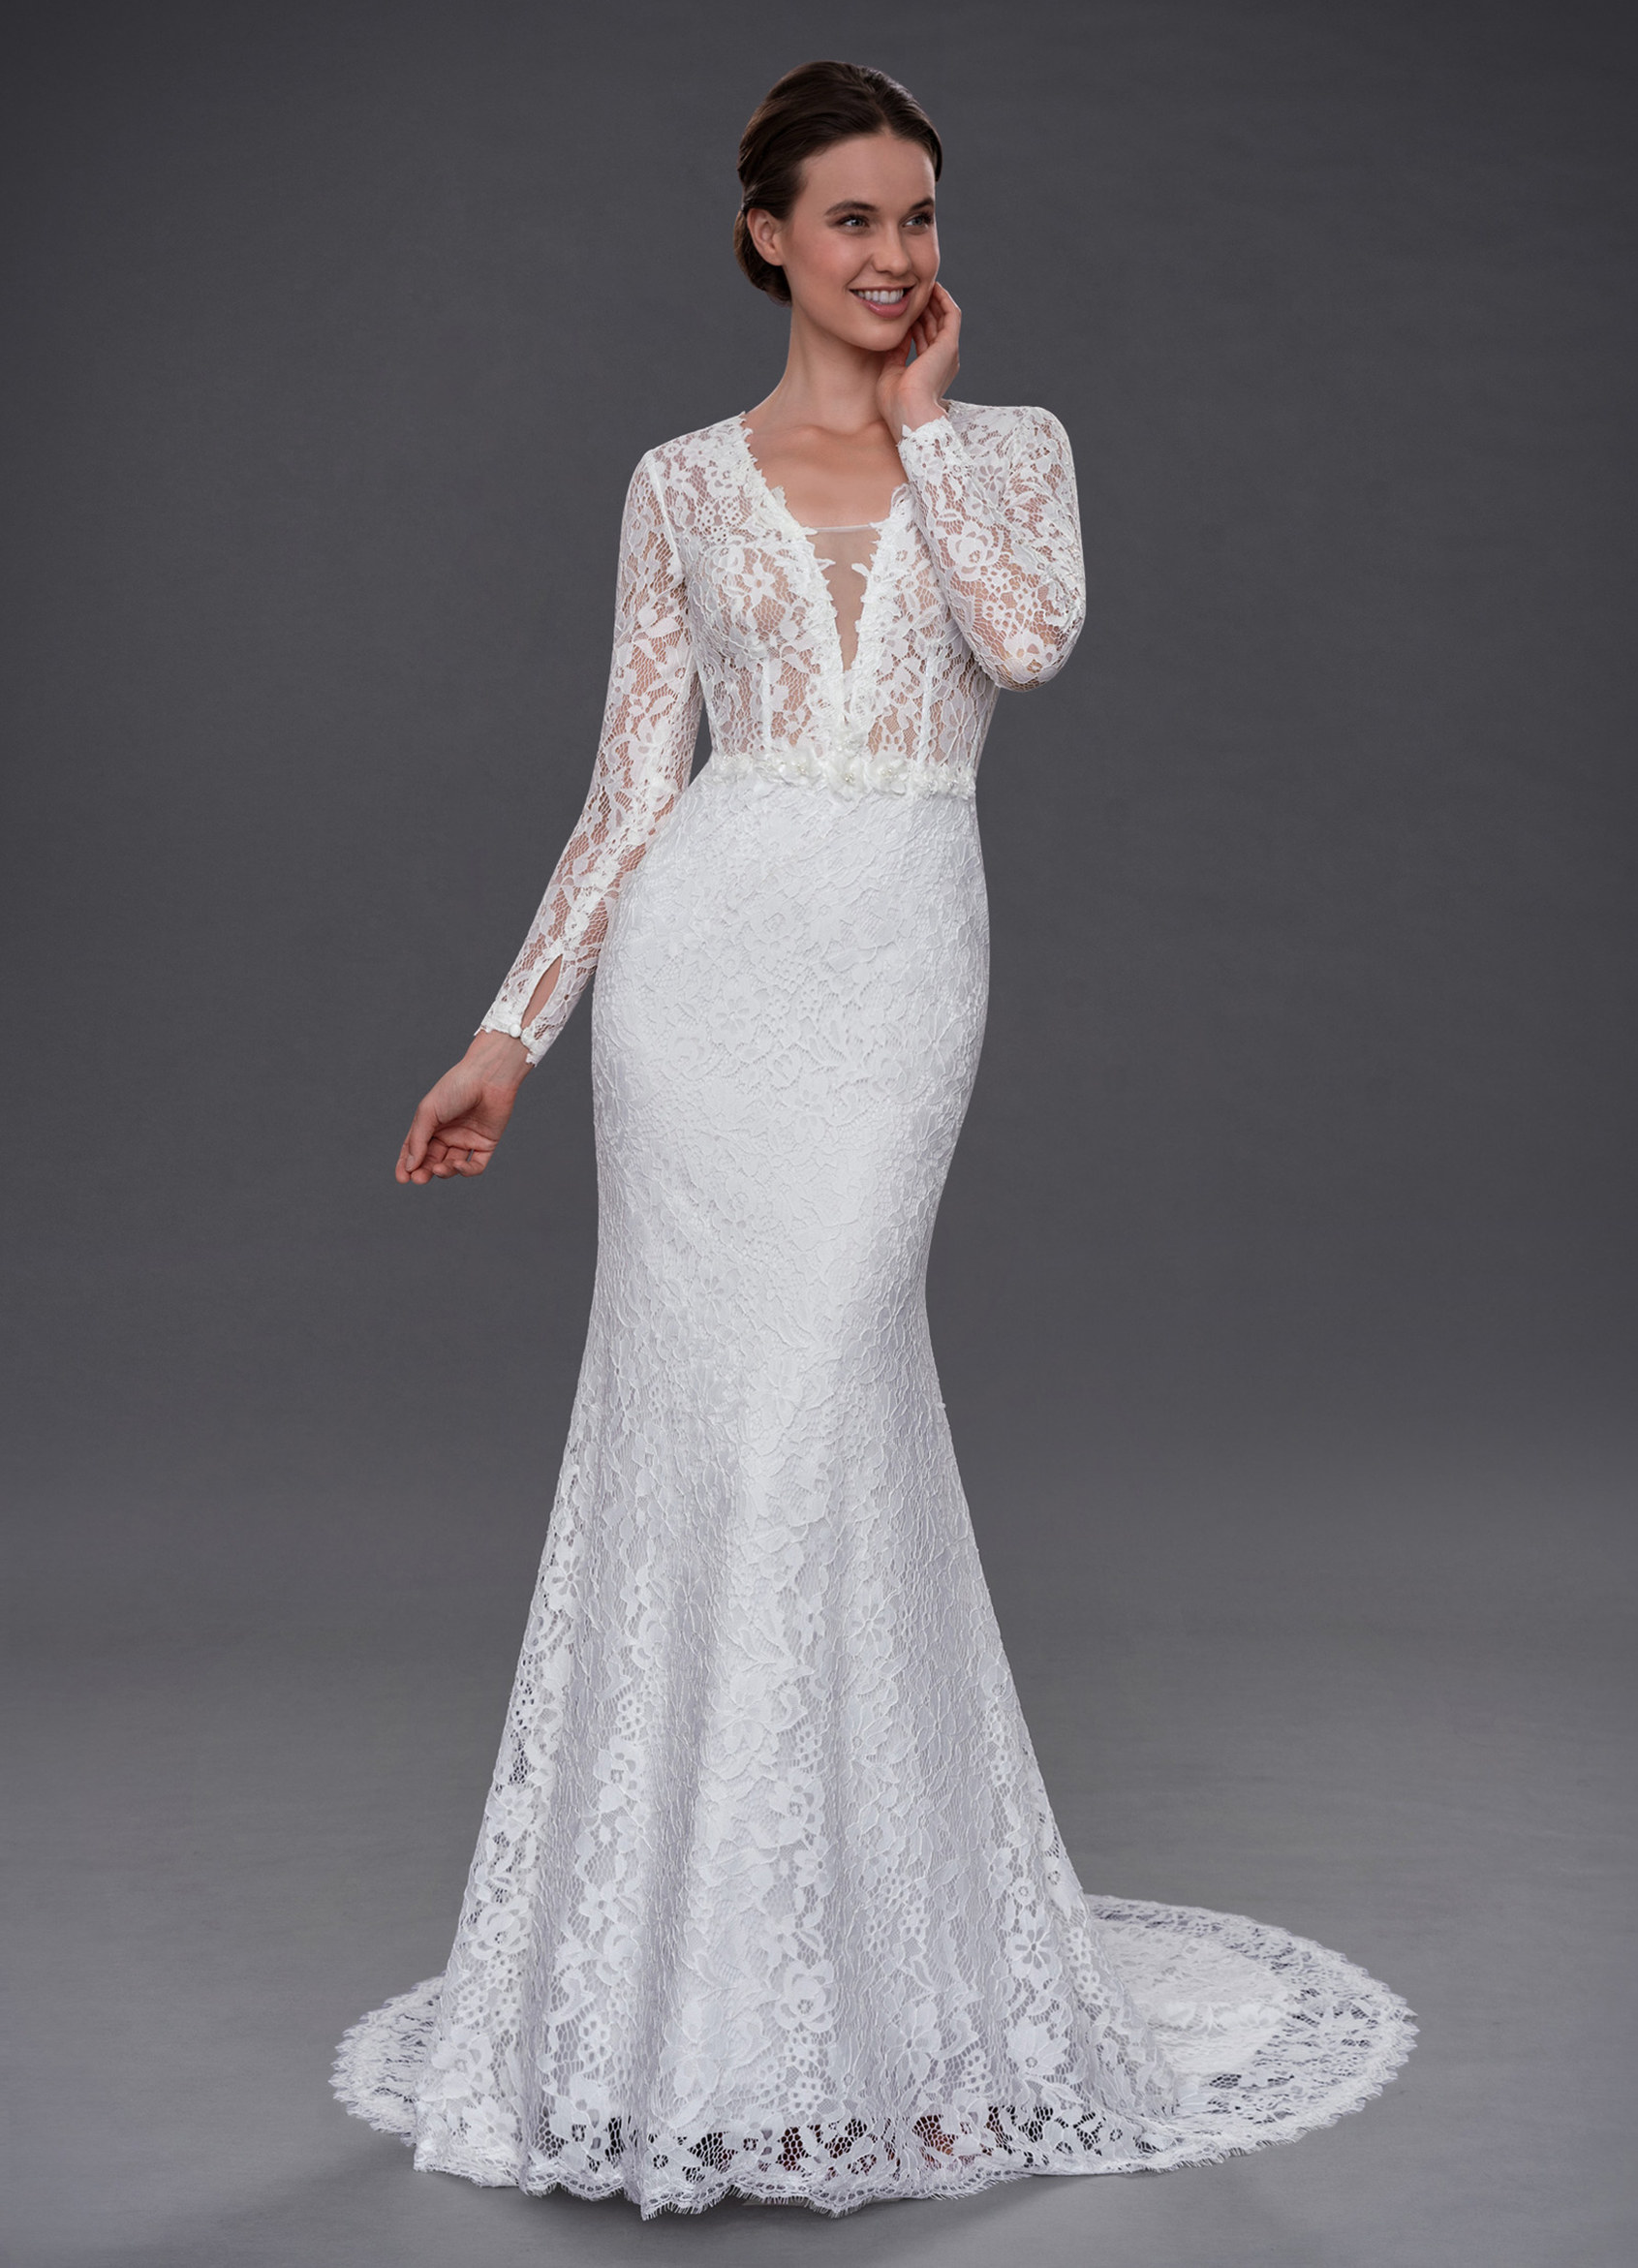  Indie Wedding Dresses of the decade Don t miss out 